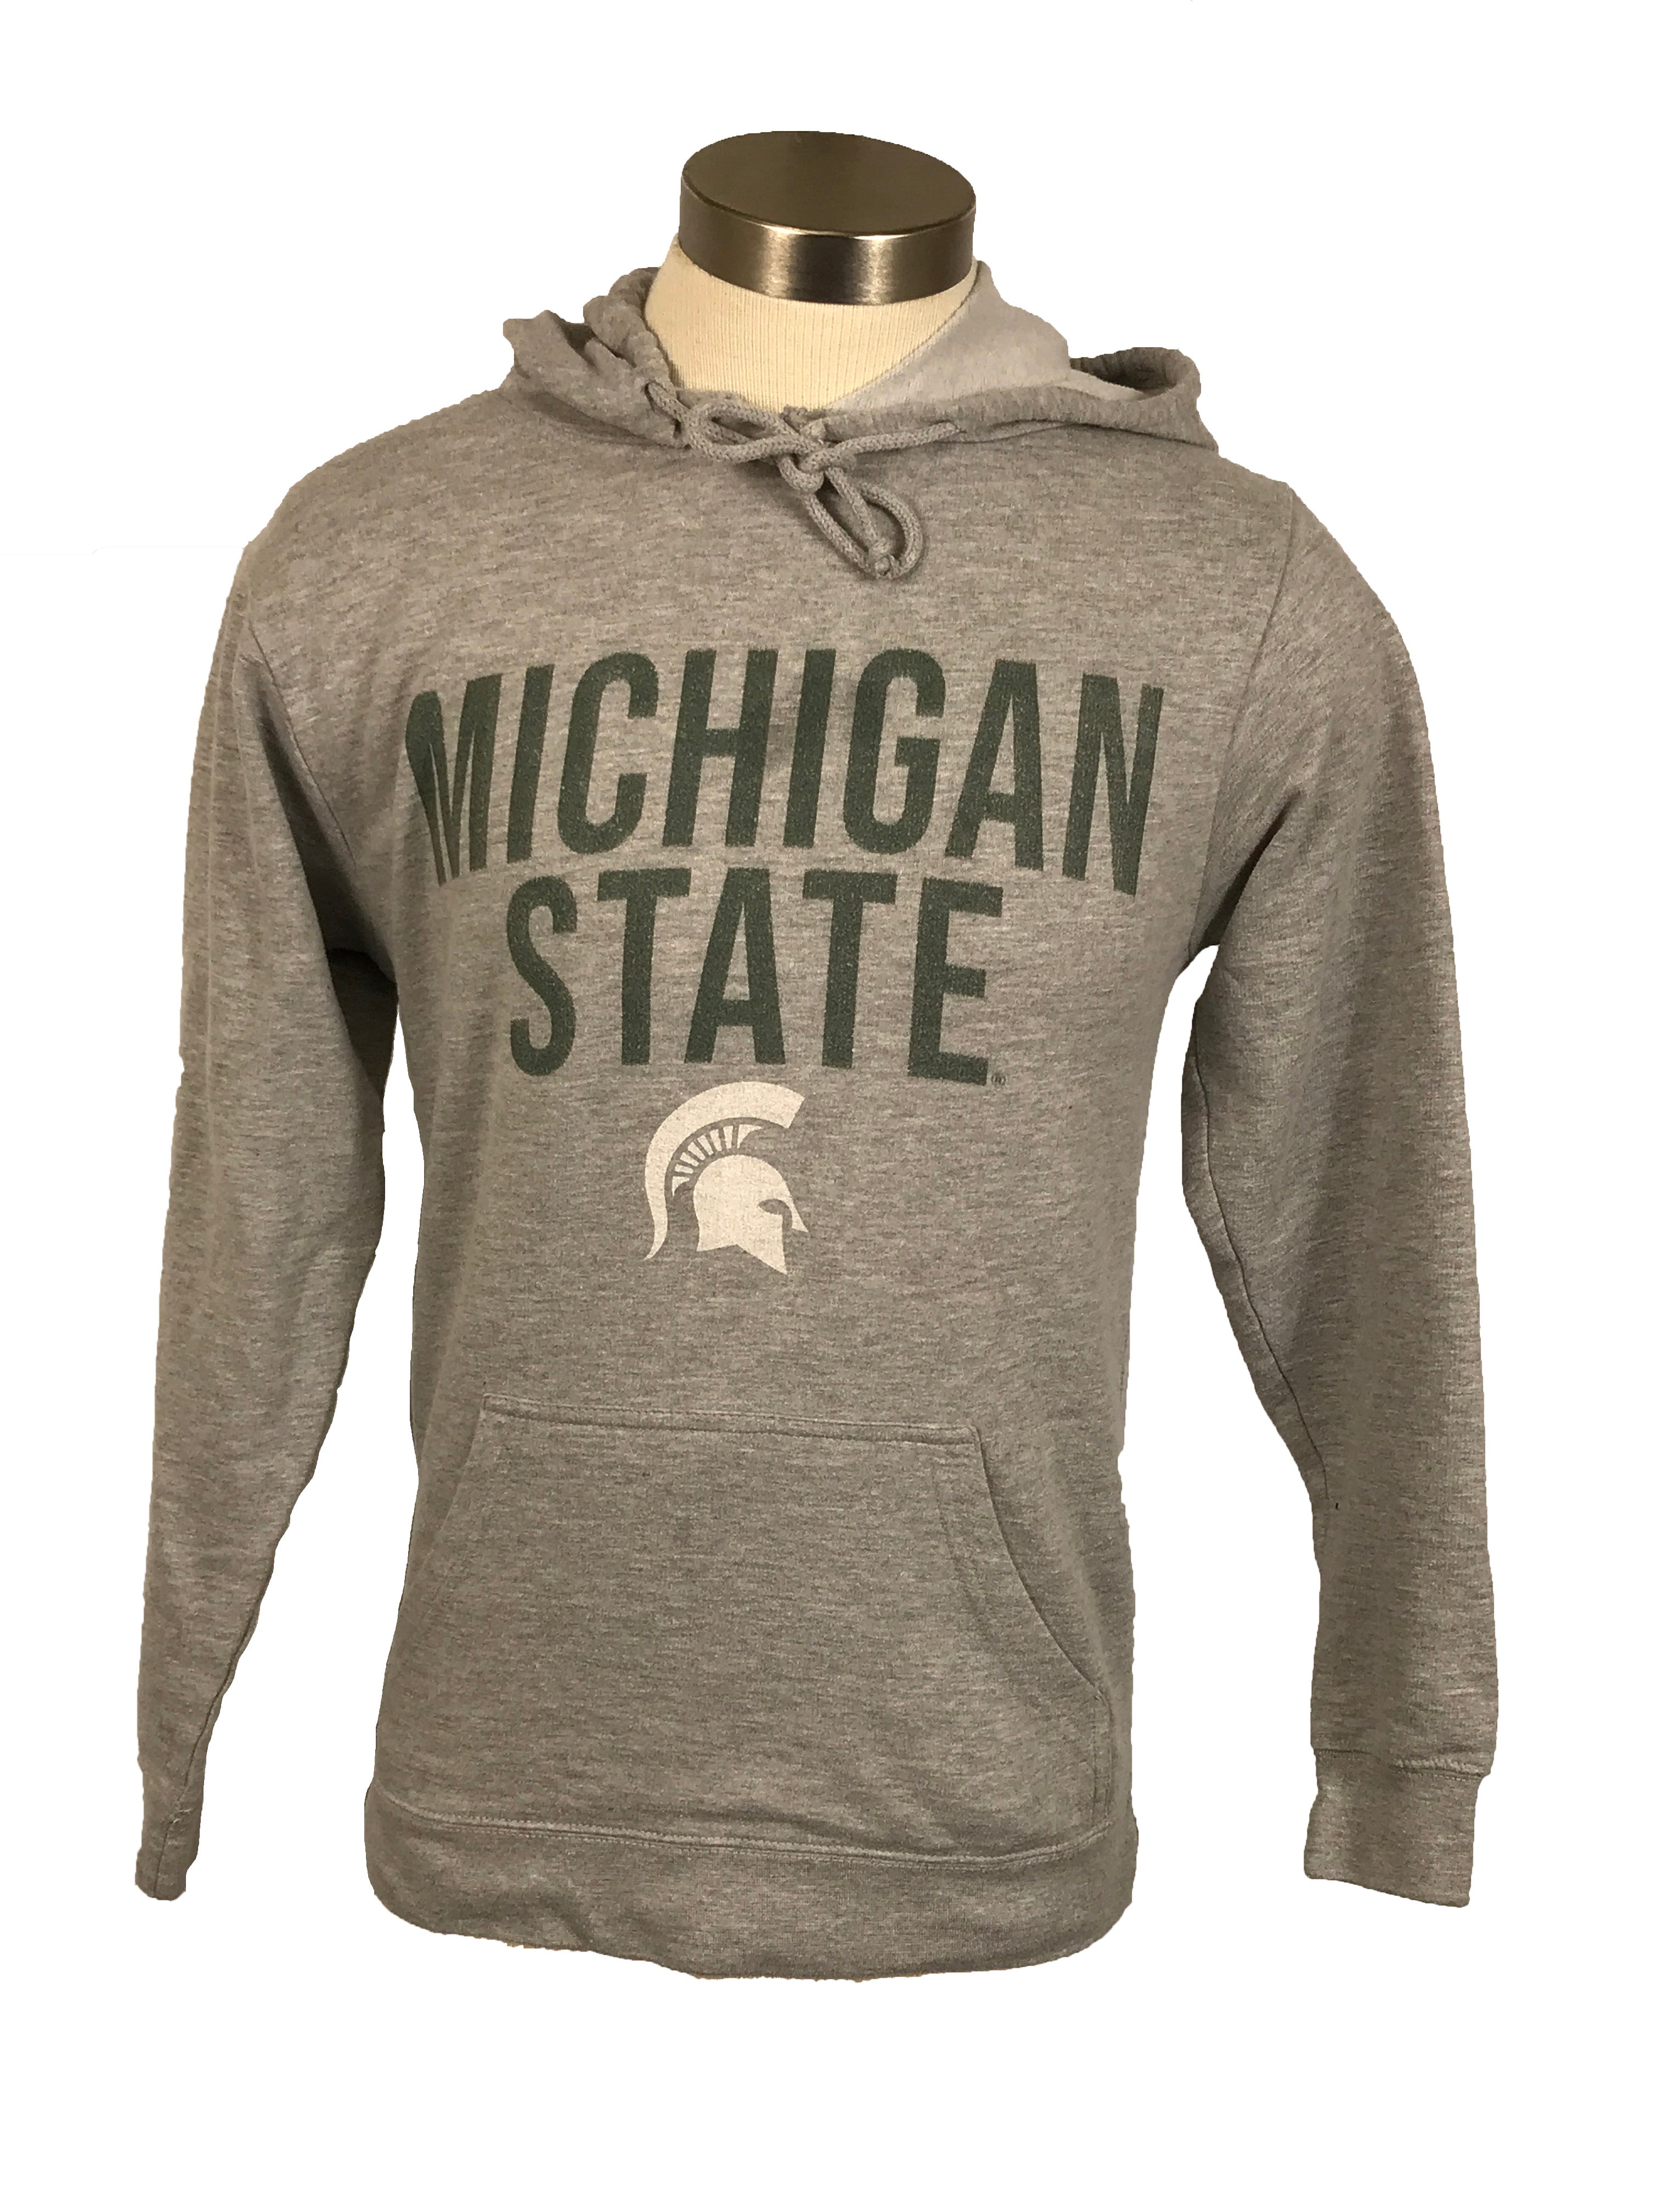 Michigan State University Gray Hoodie Approximate Unisex Size S